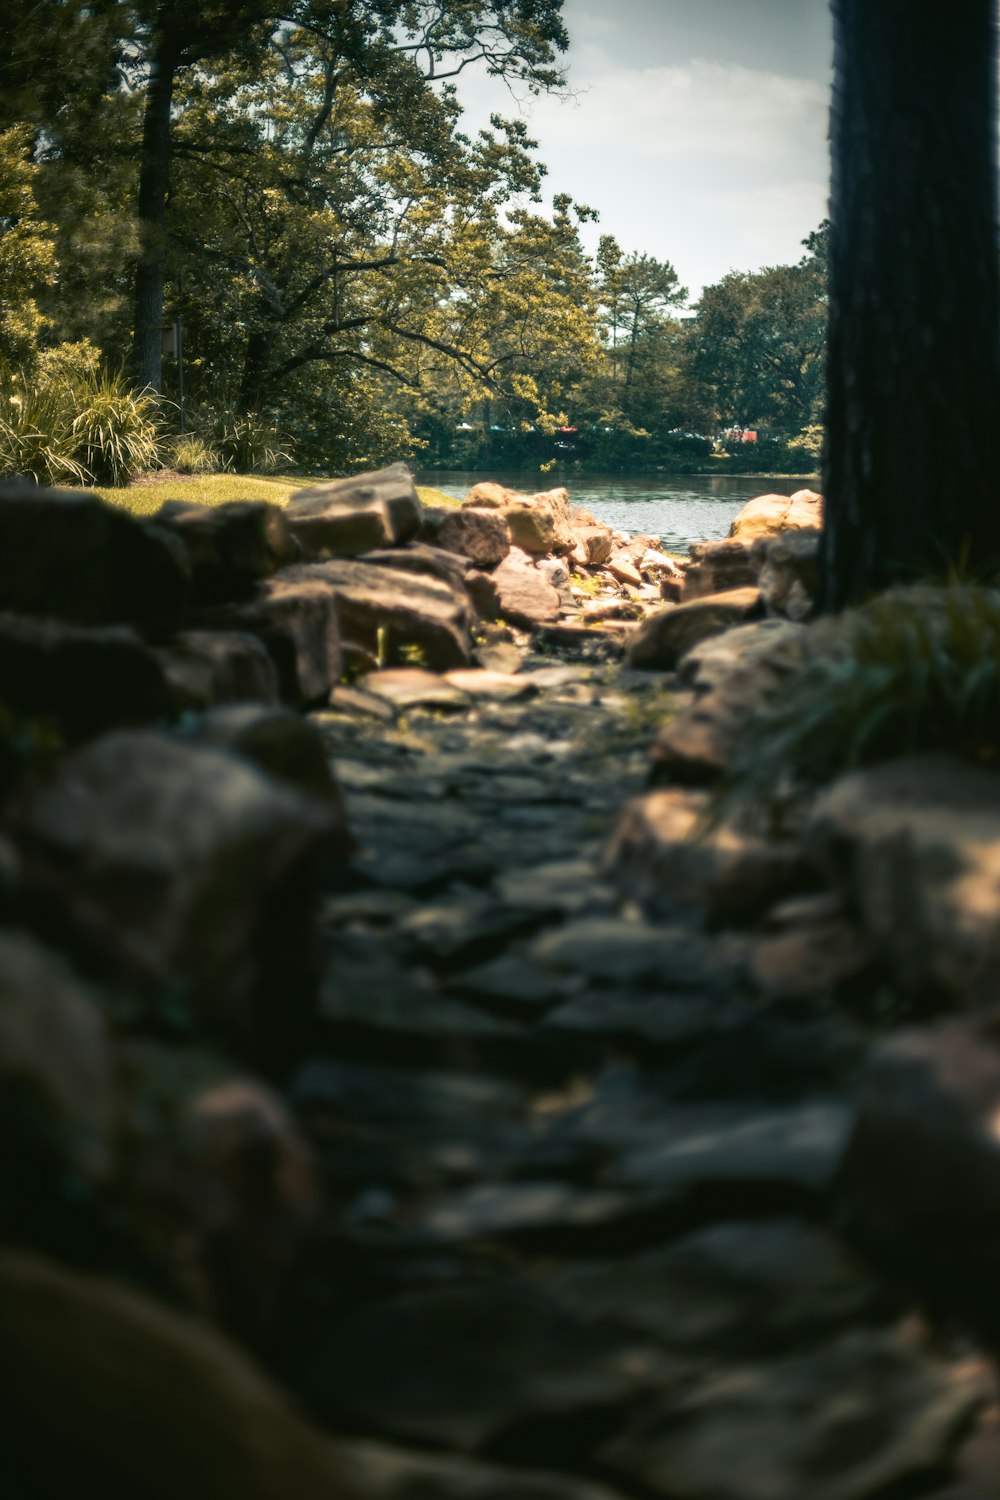 a stone path leading to a body of water